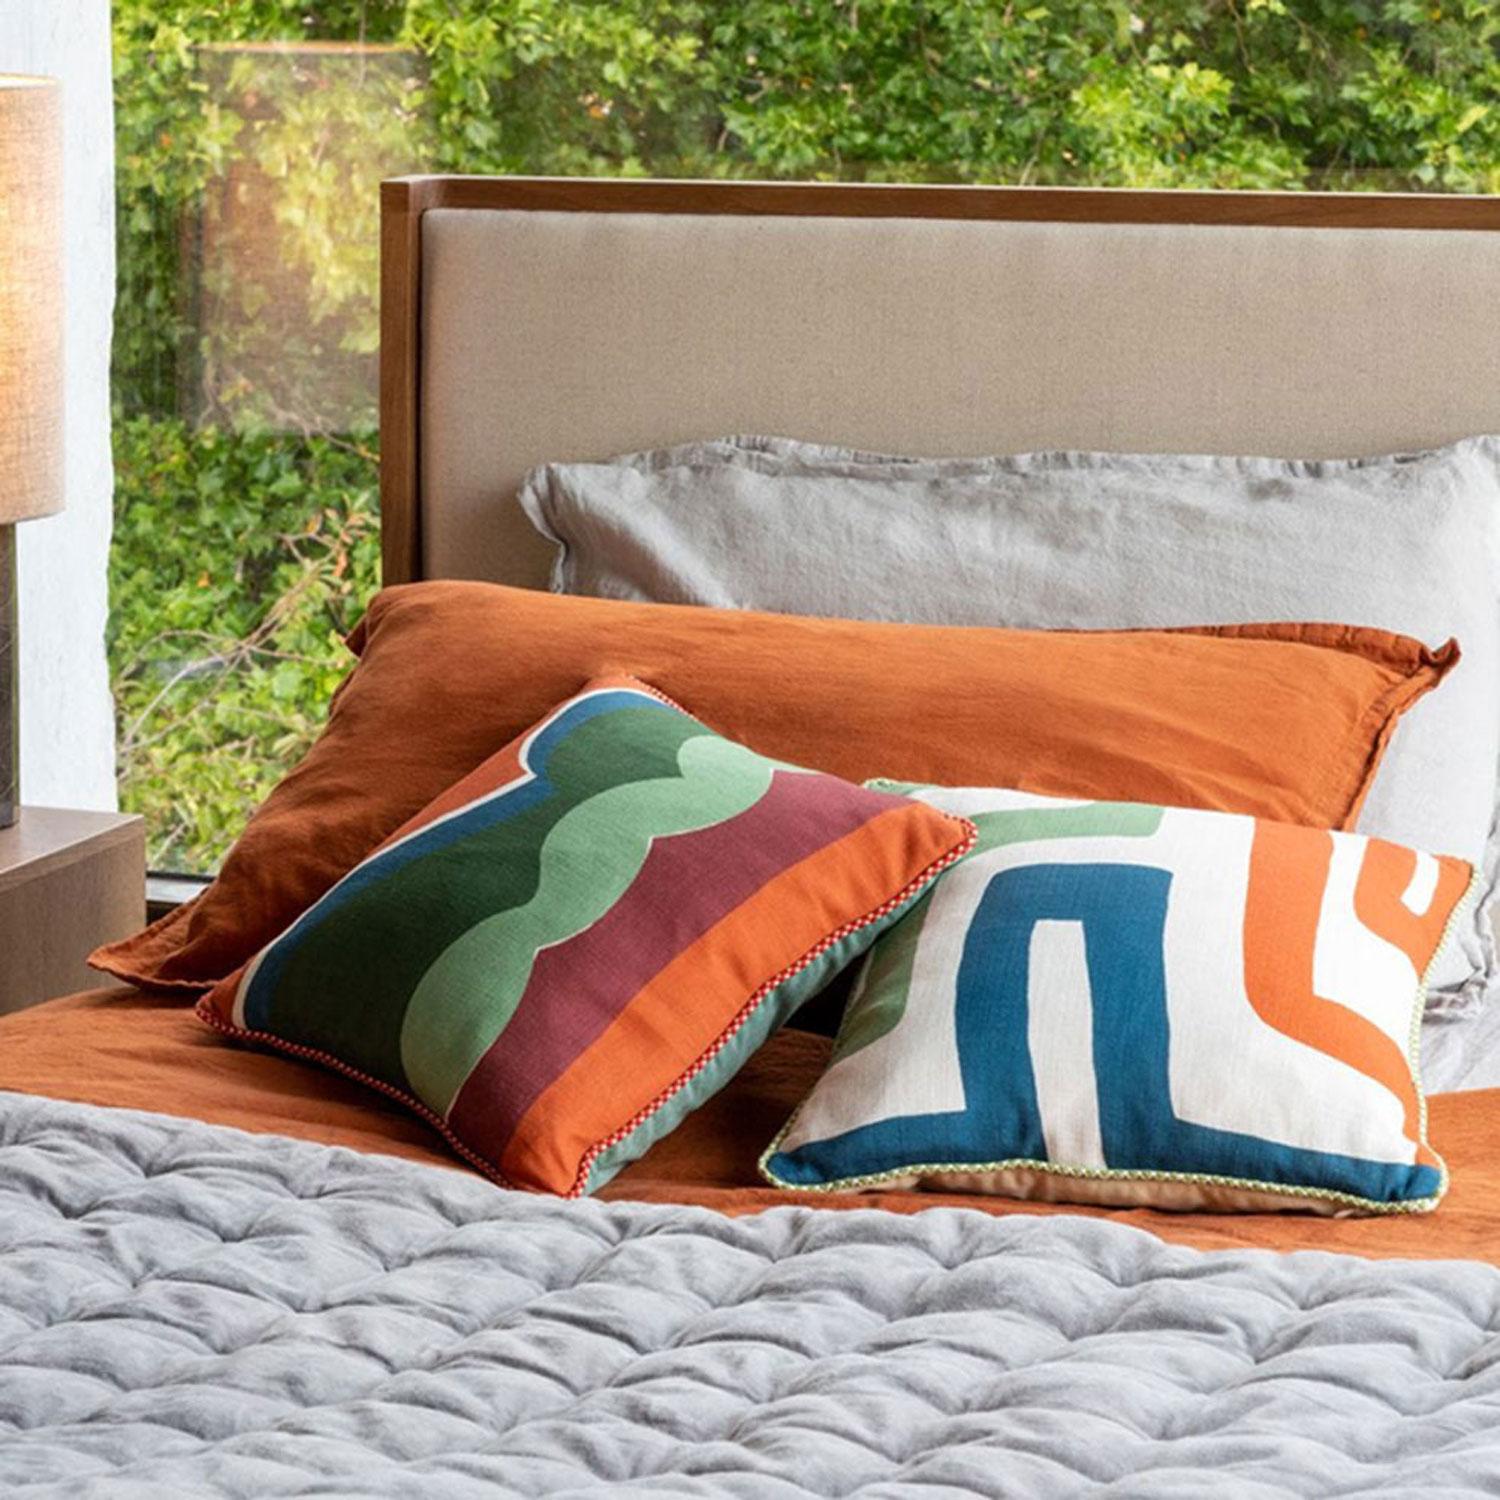 Grover has been created through an exploration of collage, playing with colour and shape. Printed onto linen the earthy tones reflect nature, finished with an orange and white braided cotton piping and green British velvet back. The linen cloth